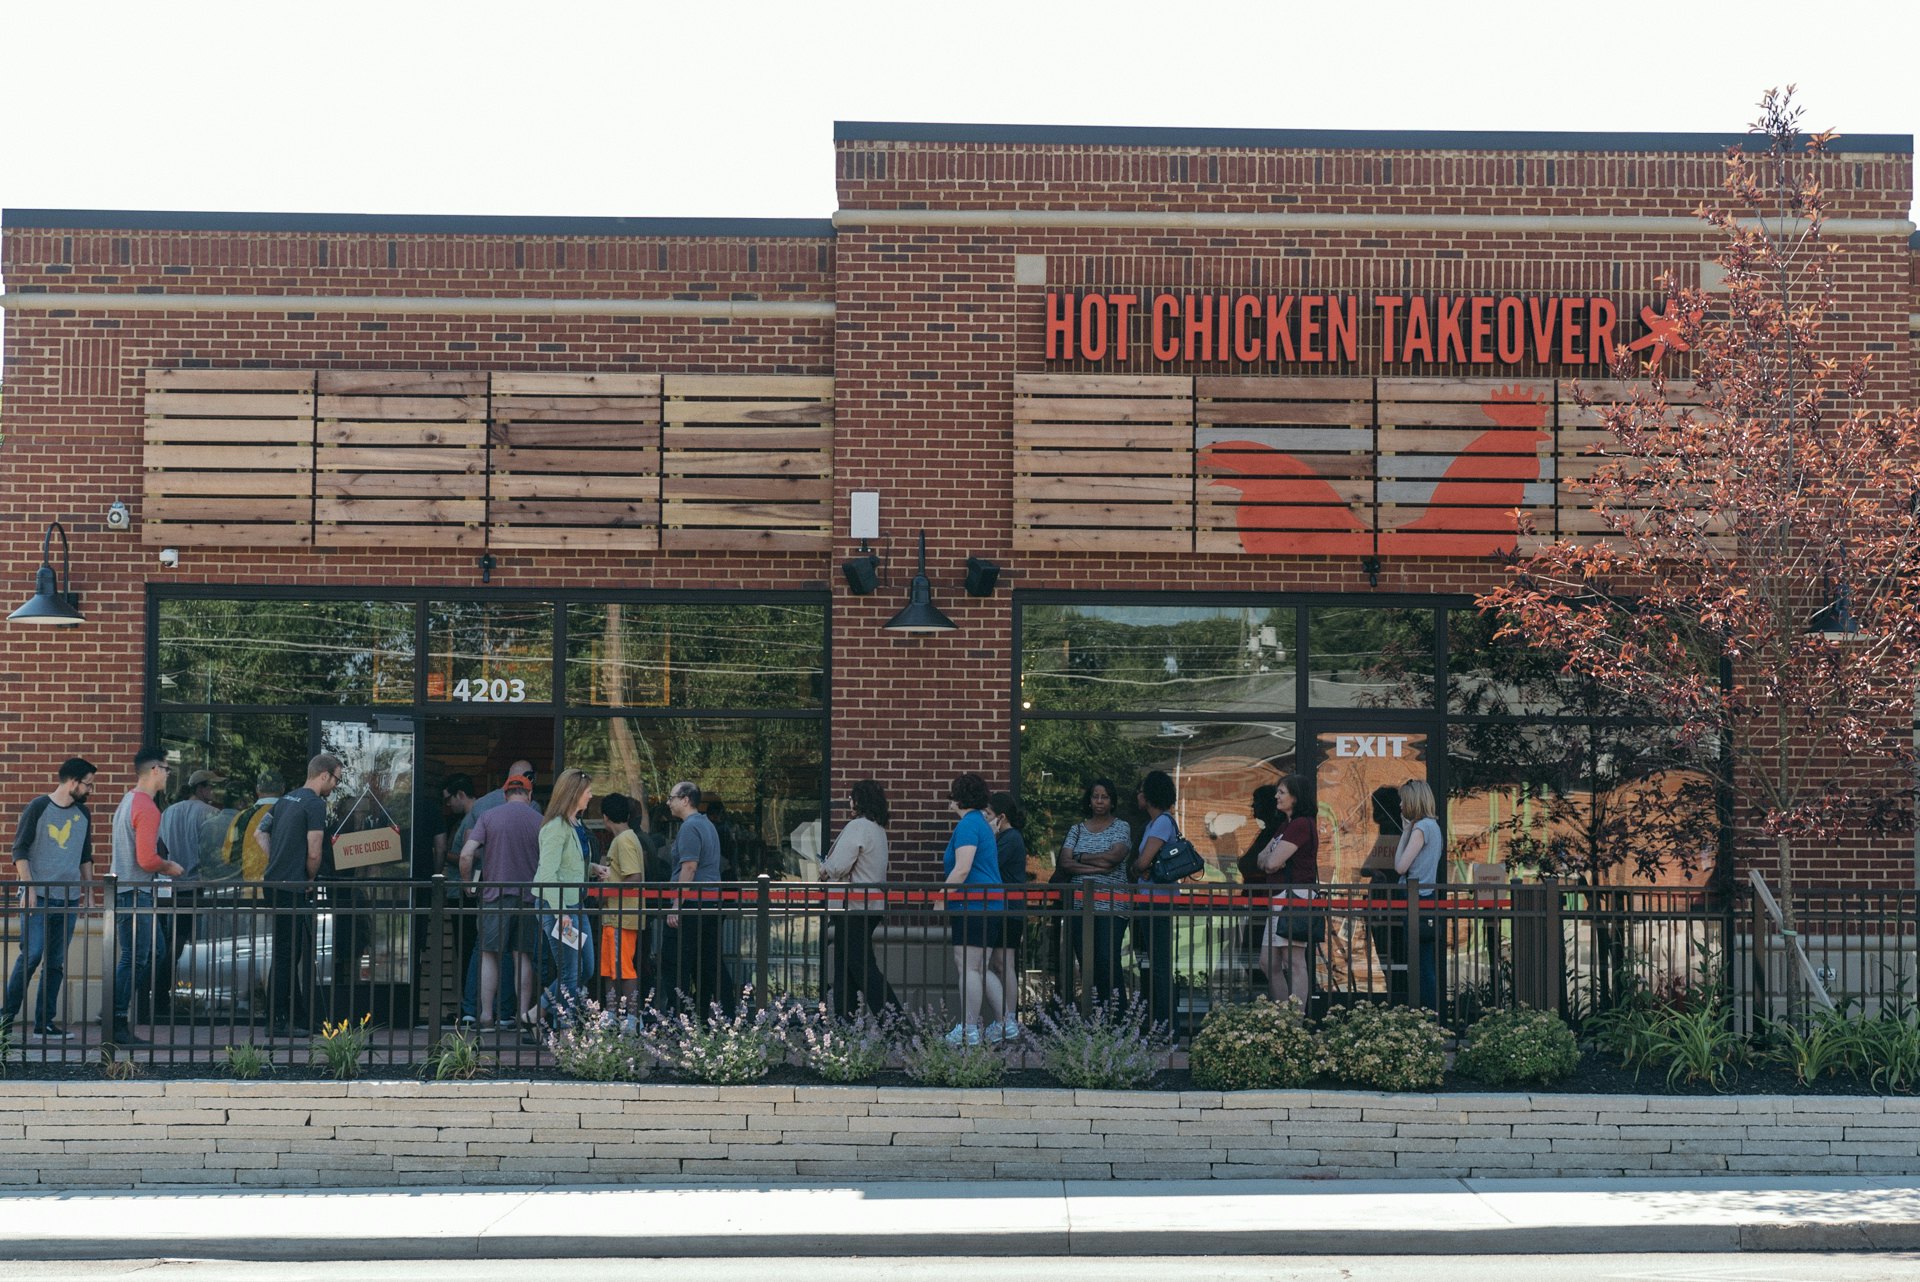 second hot chicken takeover